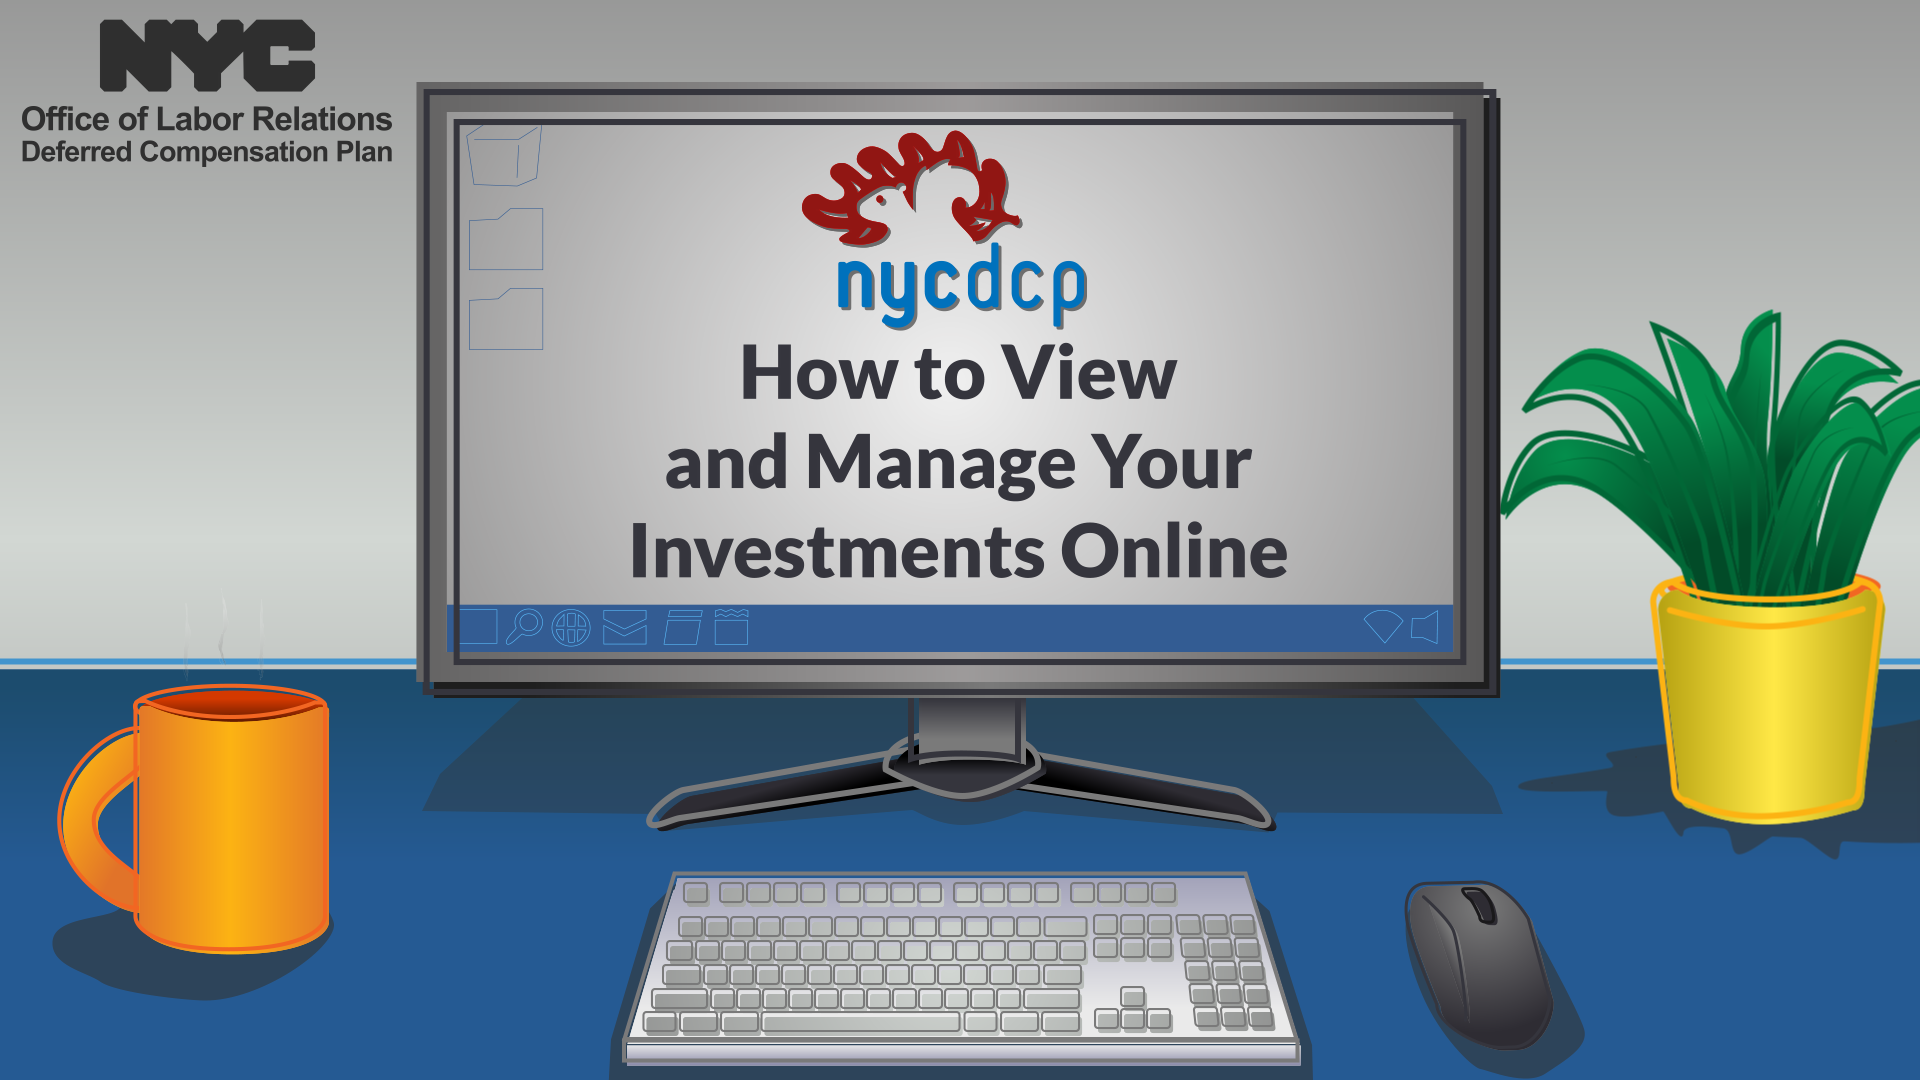 How to View and Manage Investments Online